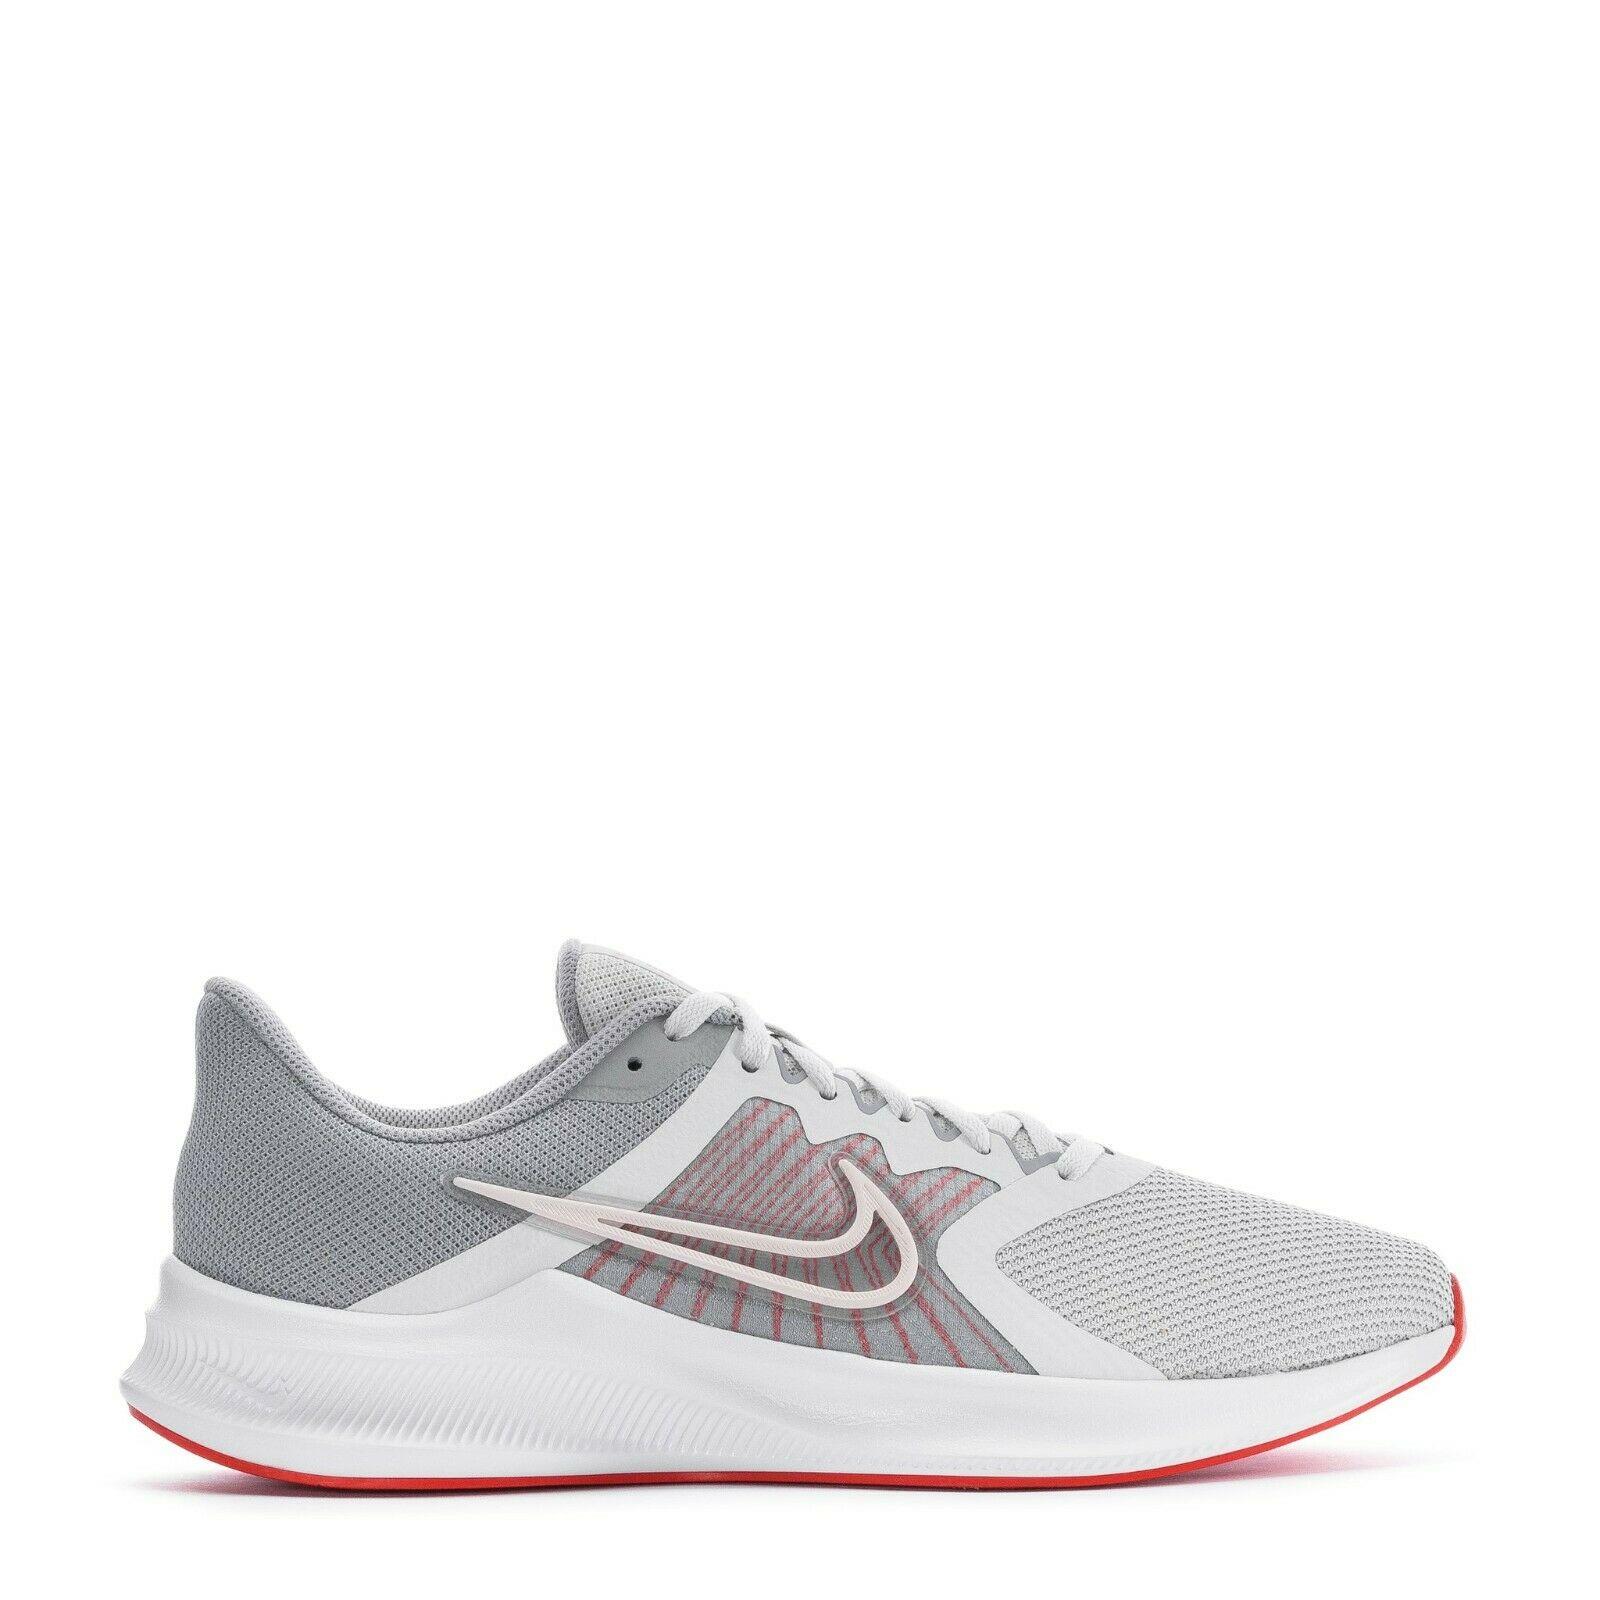 Nike Downshifter CW3411-004 Platinum Tint/wolf Grey/chile Red/summit White Shoes